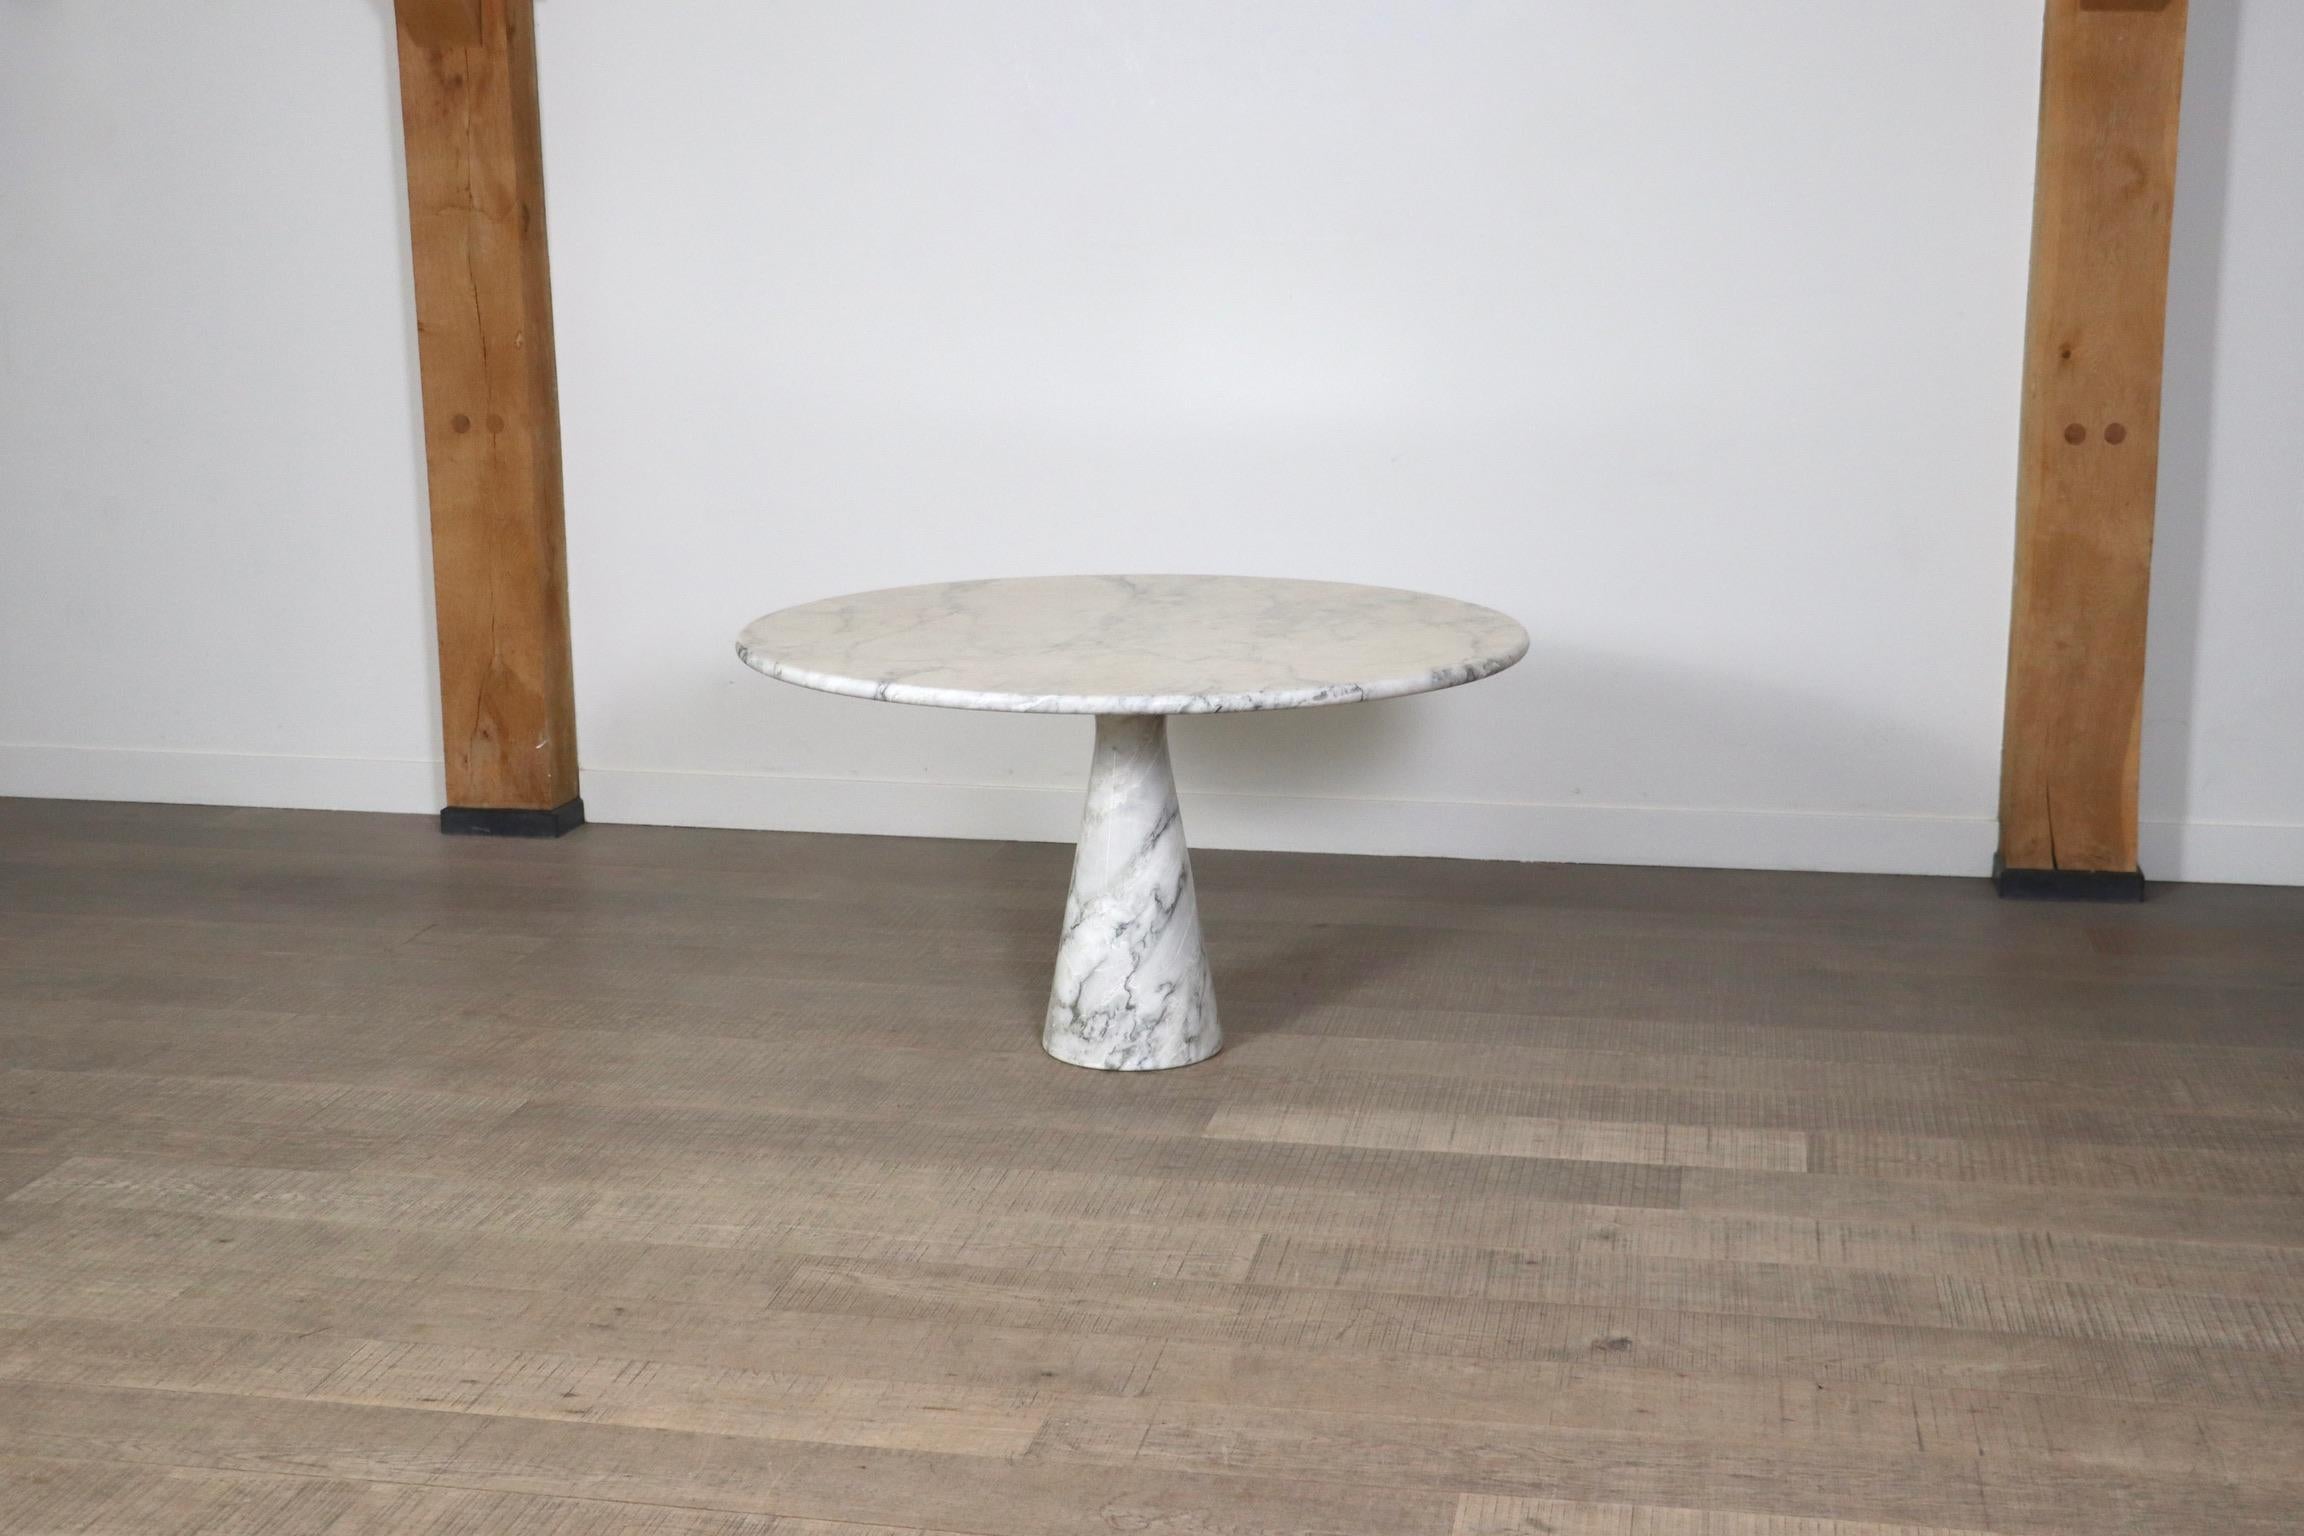 Fantastic M1 T70 marble dining table designed by Angelo Mangiarotti and manufactured by Skipper, Italy 1970s. This table is made from solid Carrara marble which has a beautiful grain in it. The single joint leg connects the top to the base and